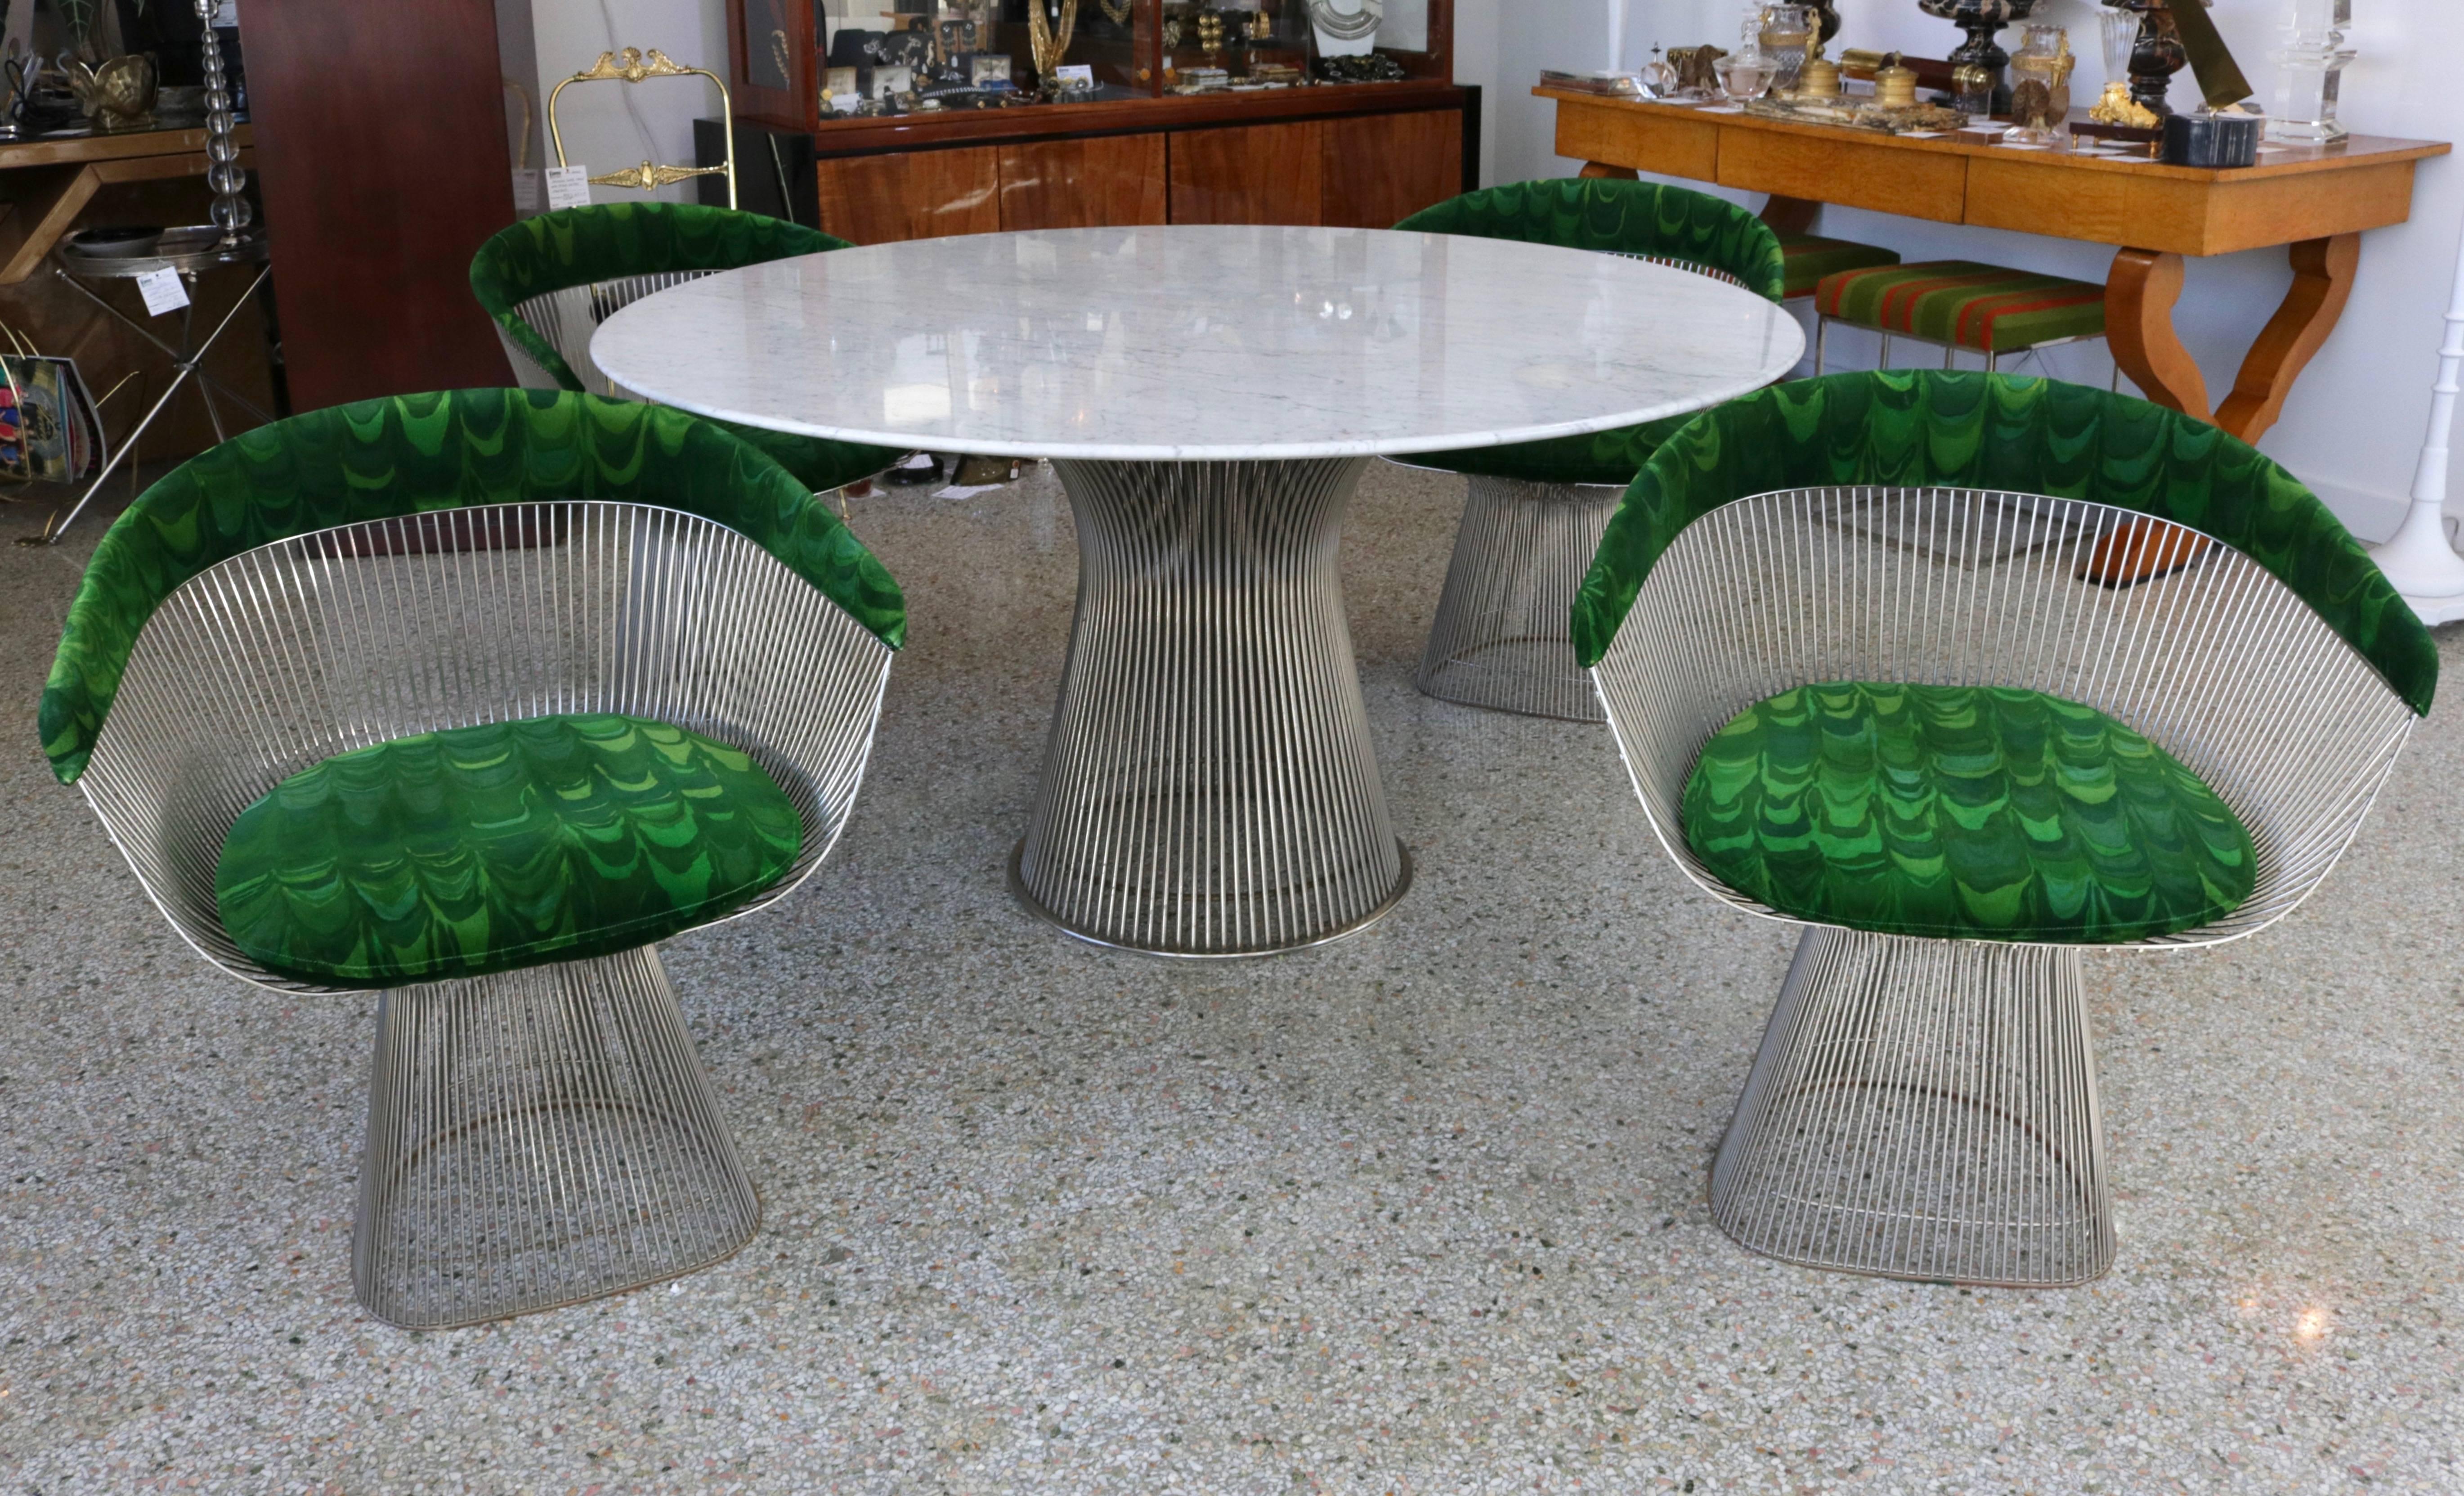 This set of table and chairs are by the iconic American designer Warren Platner and were produced by Knoll Furniture in 1971 and retain their original Jack Lenor Larsen velvet/velour fabric.  The marble is a soft grey and white and is no longer